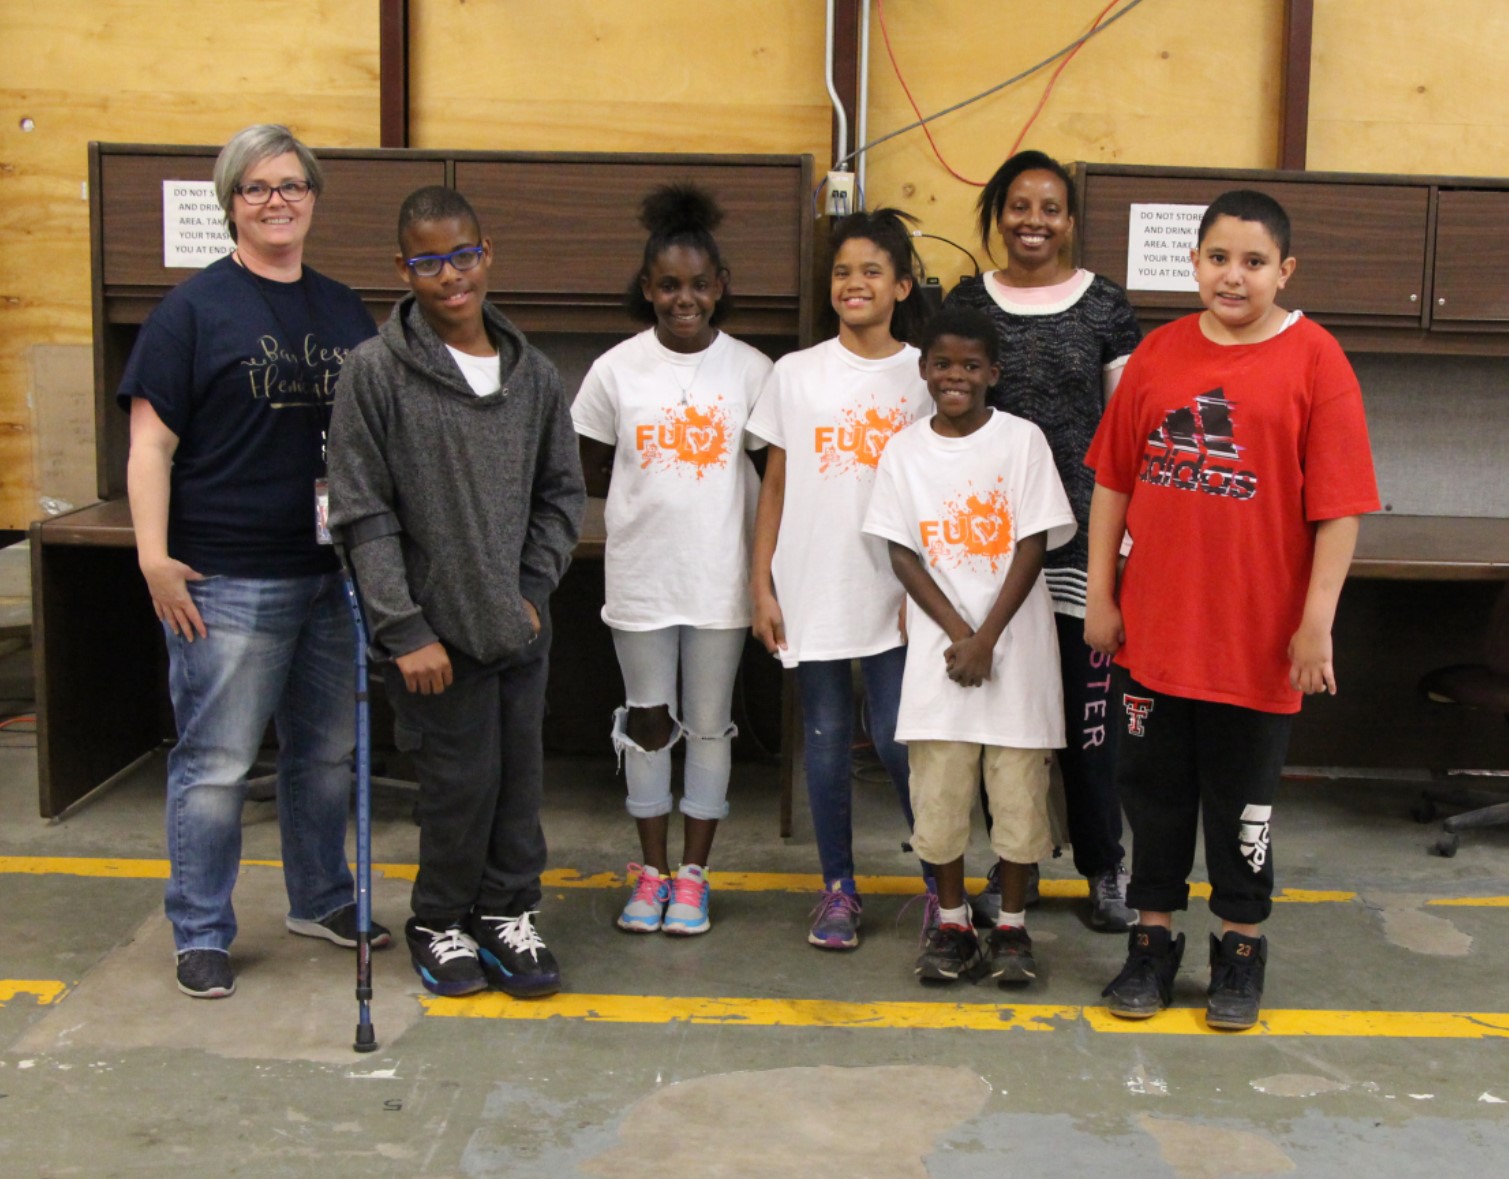 Bayless Elementary School (Lubbock) recently visited NWI research facilities to learn about the wind research and their possible future as scientists.